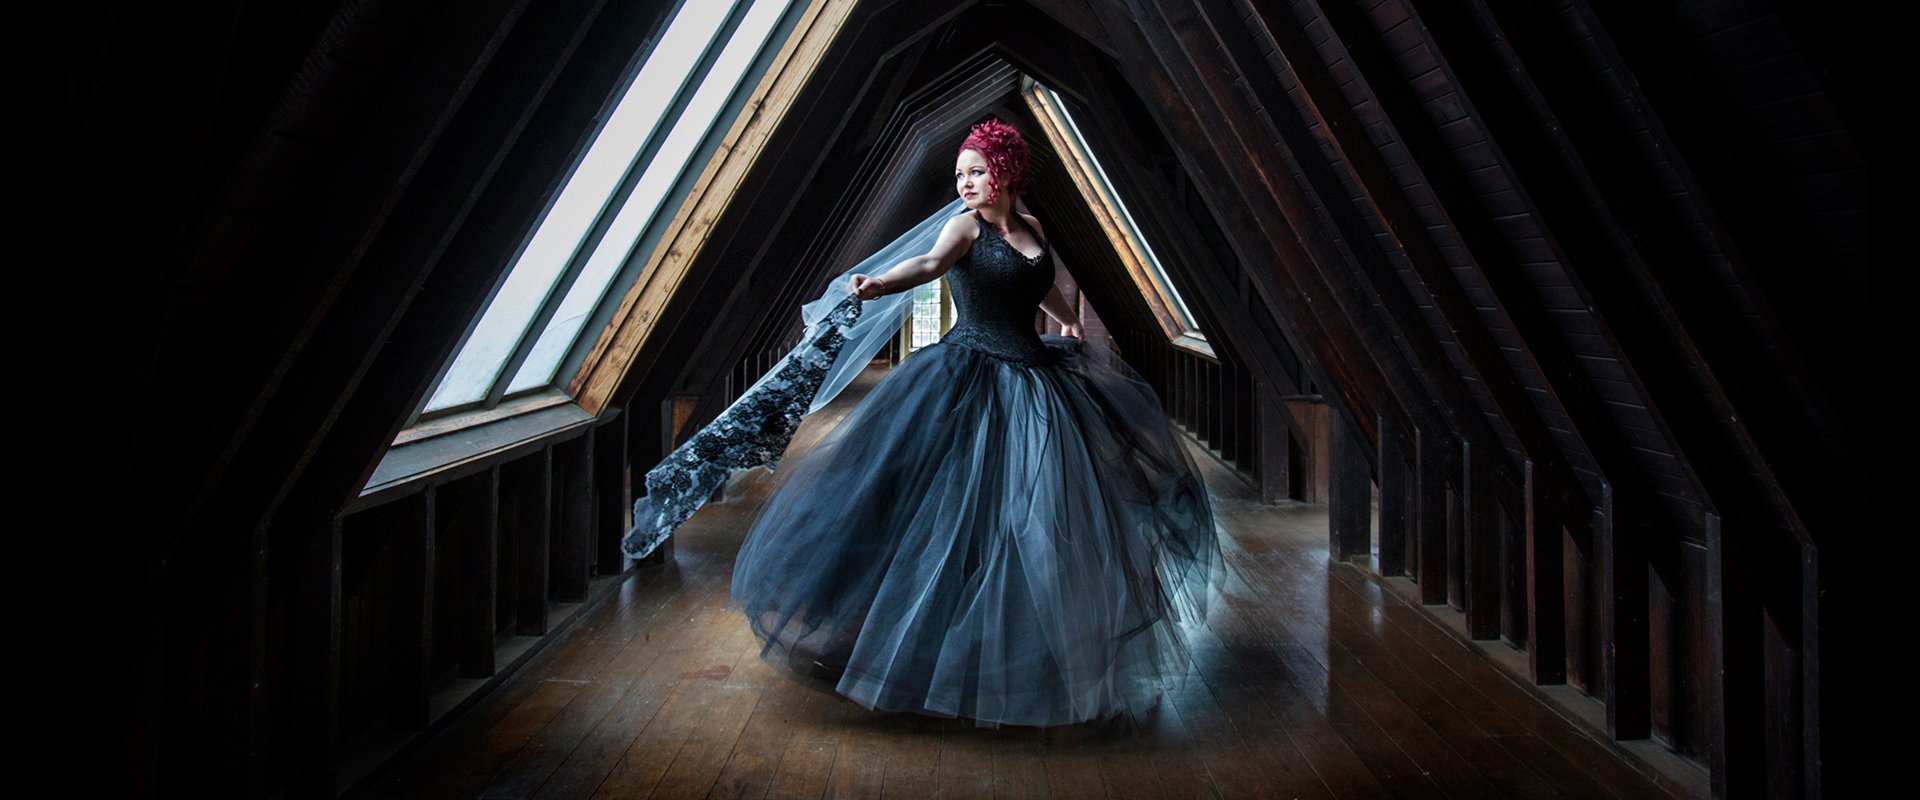 Gothic bride spins in attic window. Photography © Field of Vision